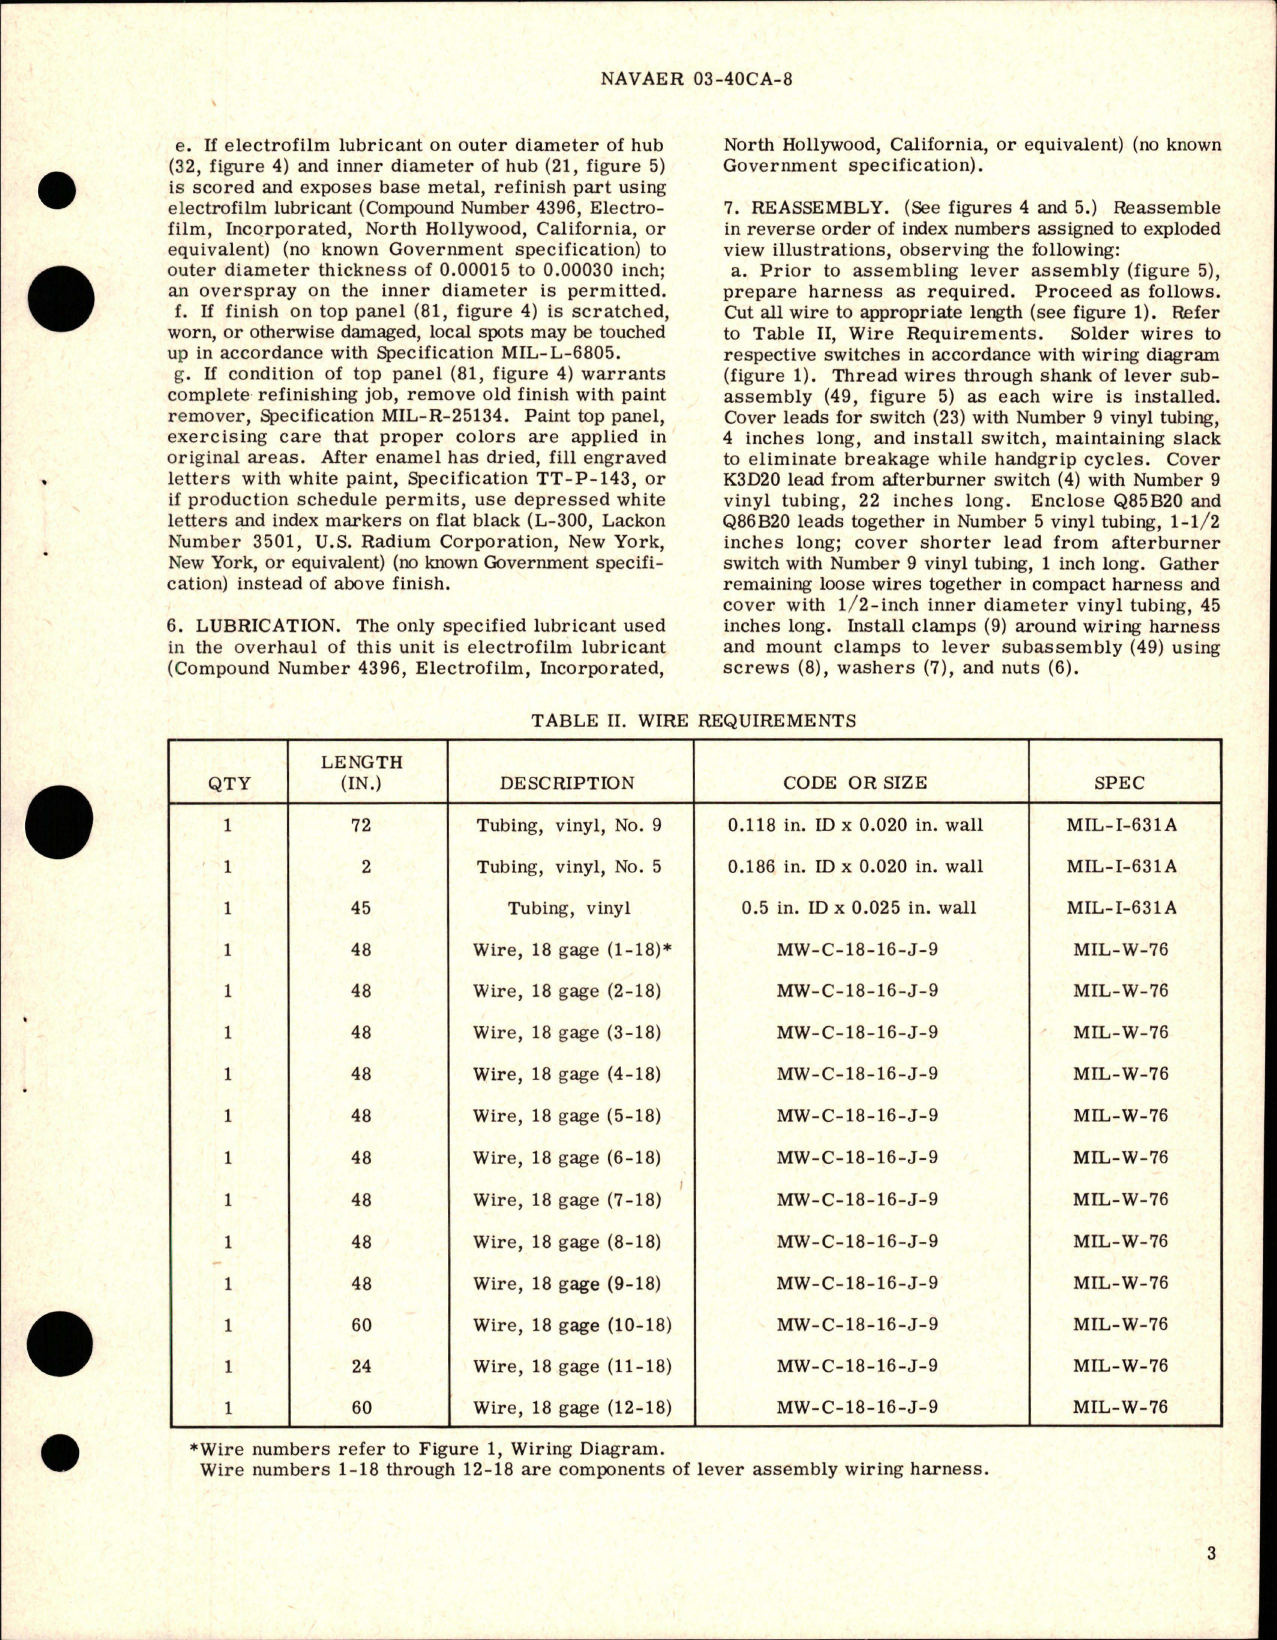 Sample page 5 from AirCorps Library document: Overhaul Instructions with Parts Breakdown for Engine Control Quadrant - Parts 5L4194-3 and 5L4194-4